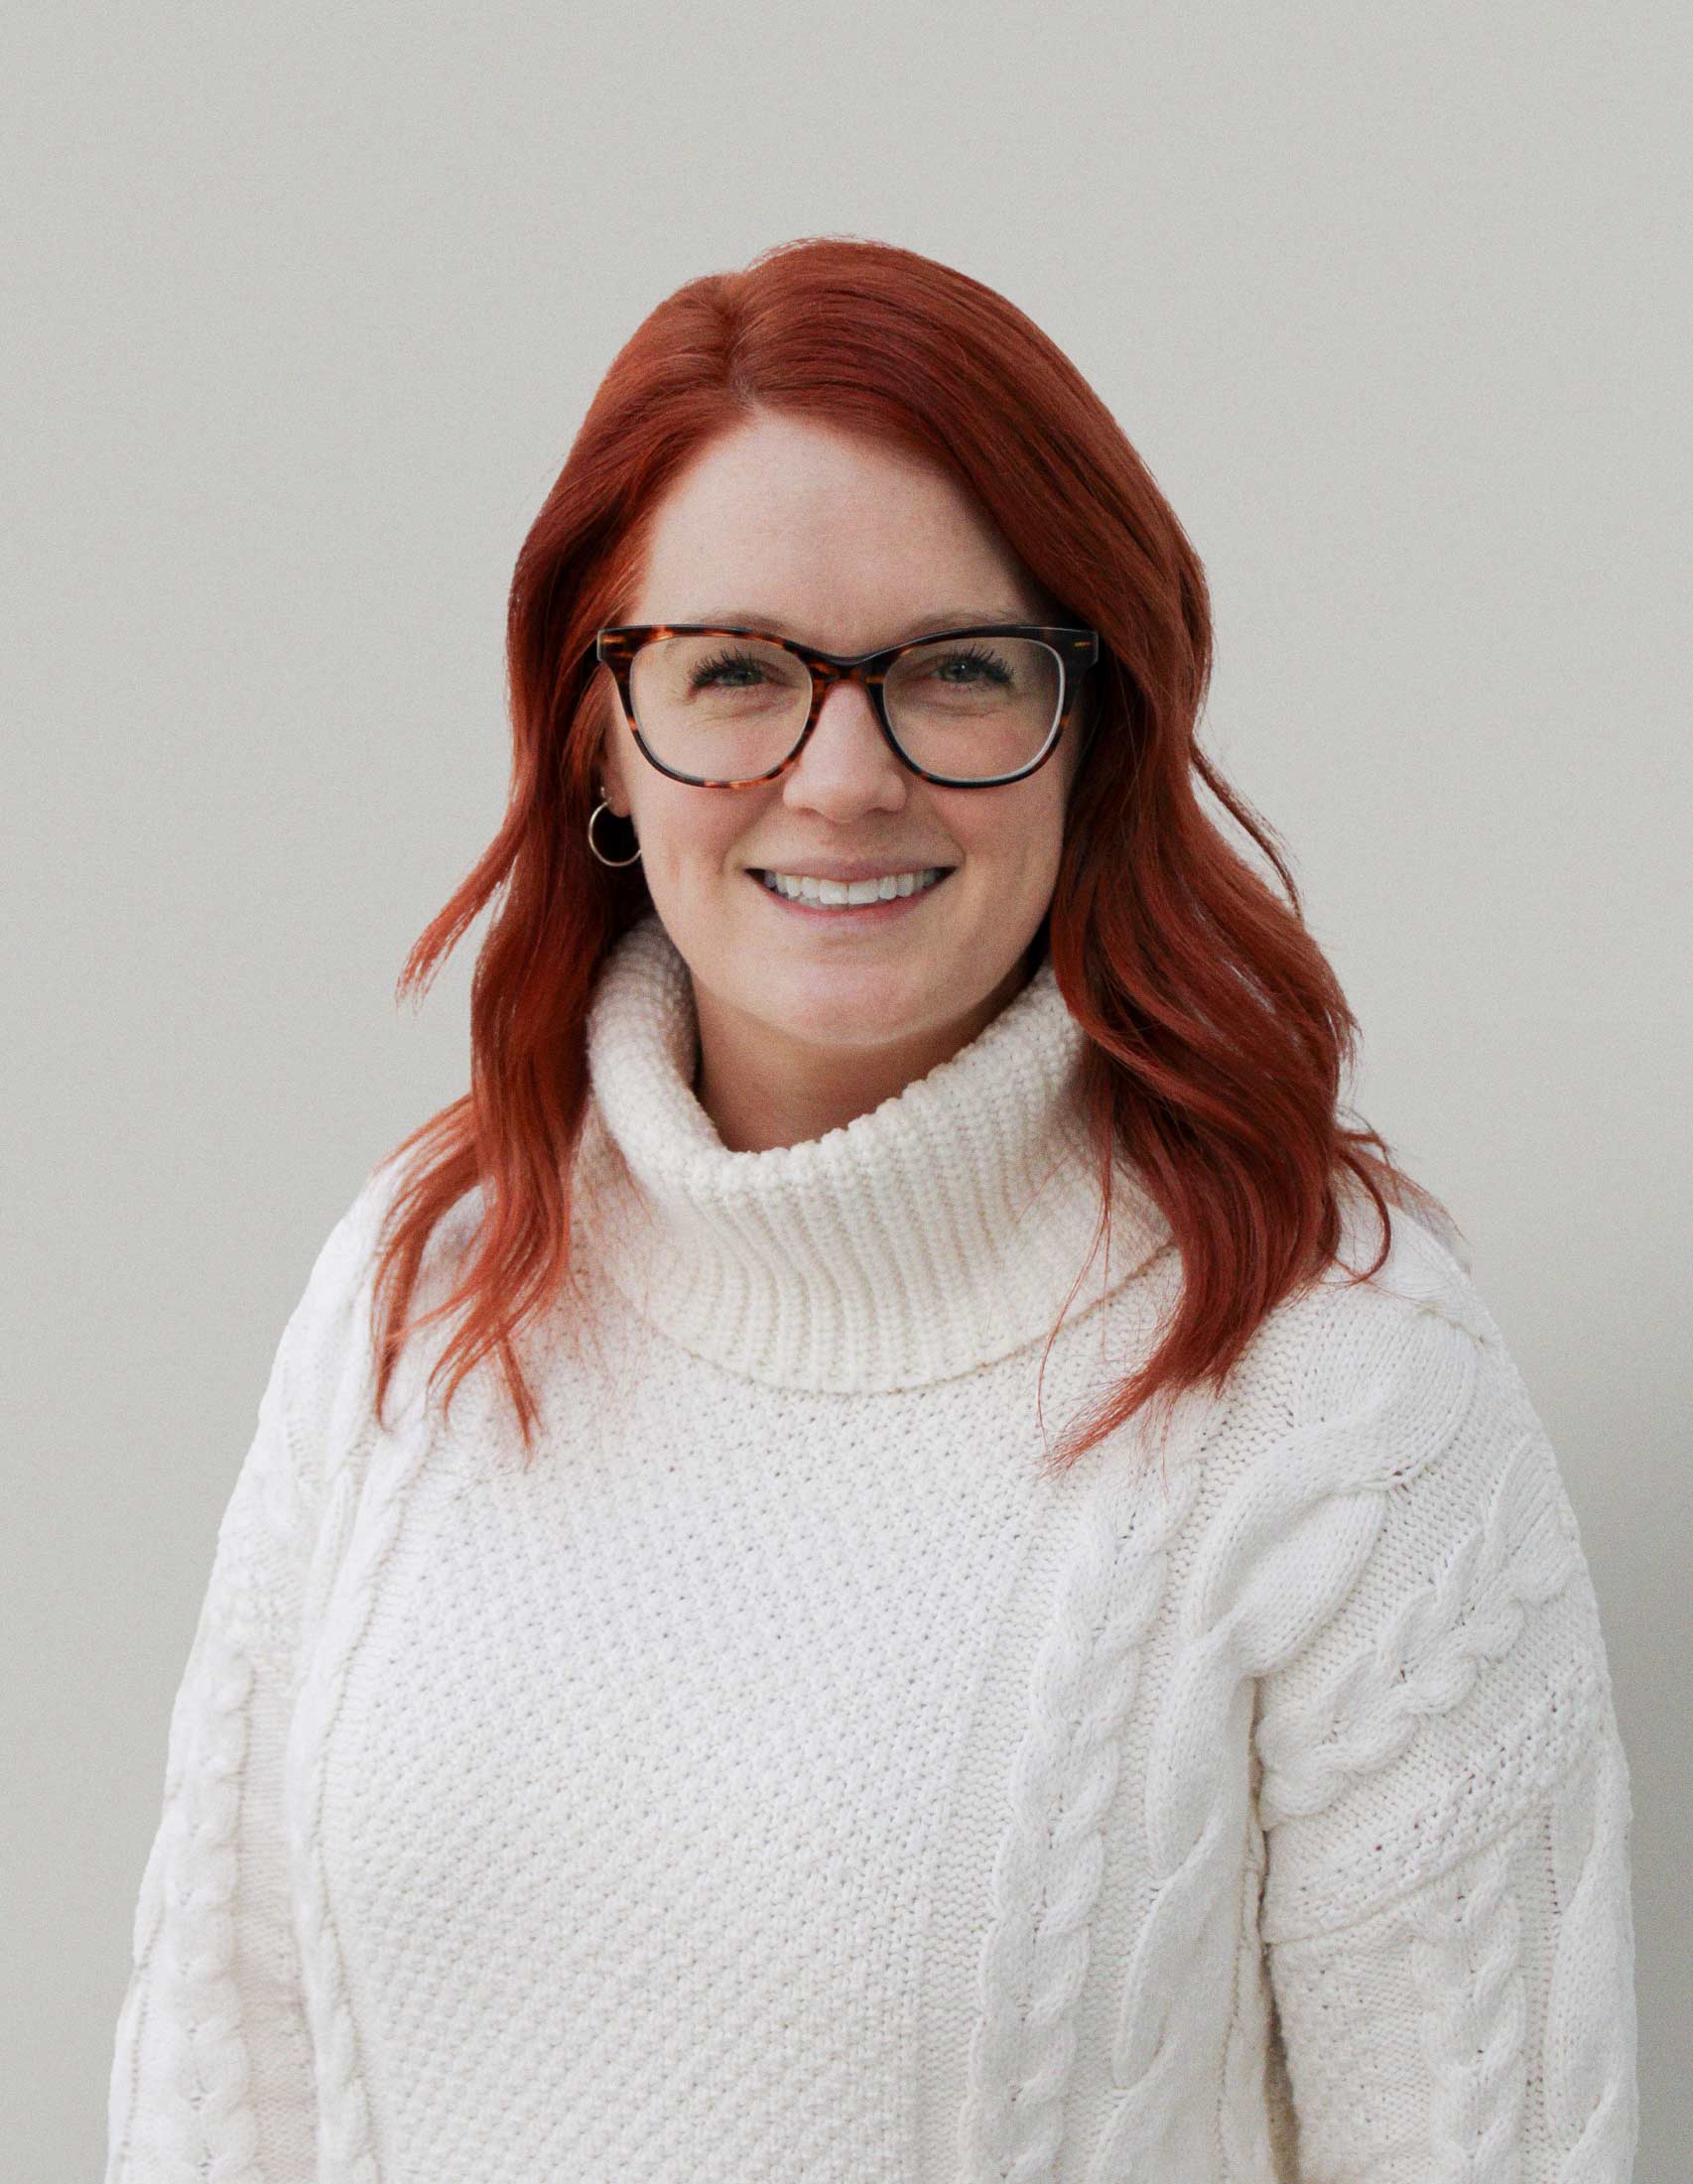 Project and Account Manager, white sweater with red hair and glasses looking at camera